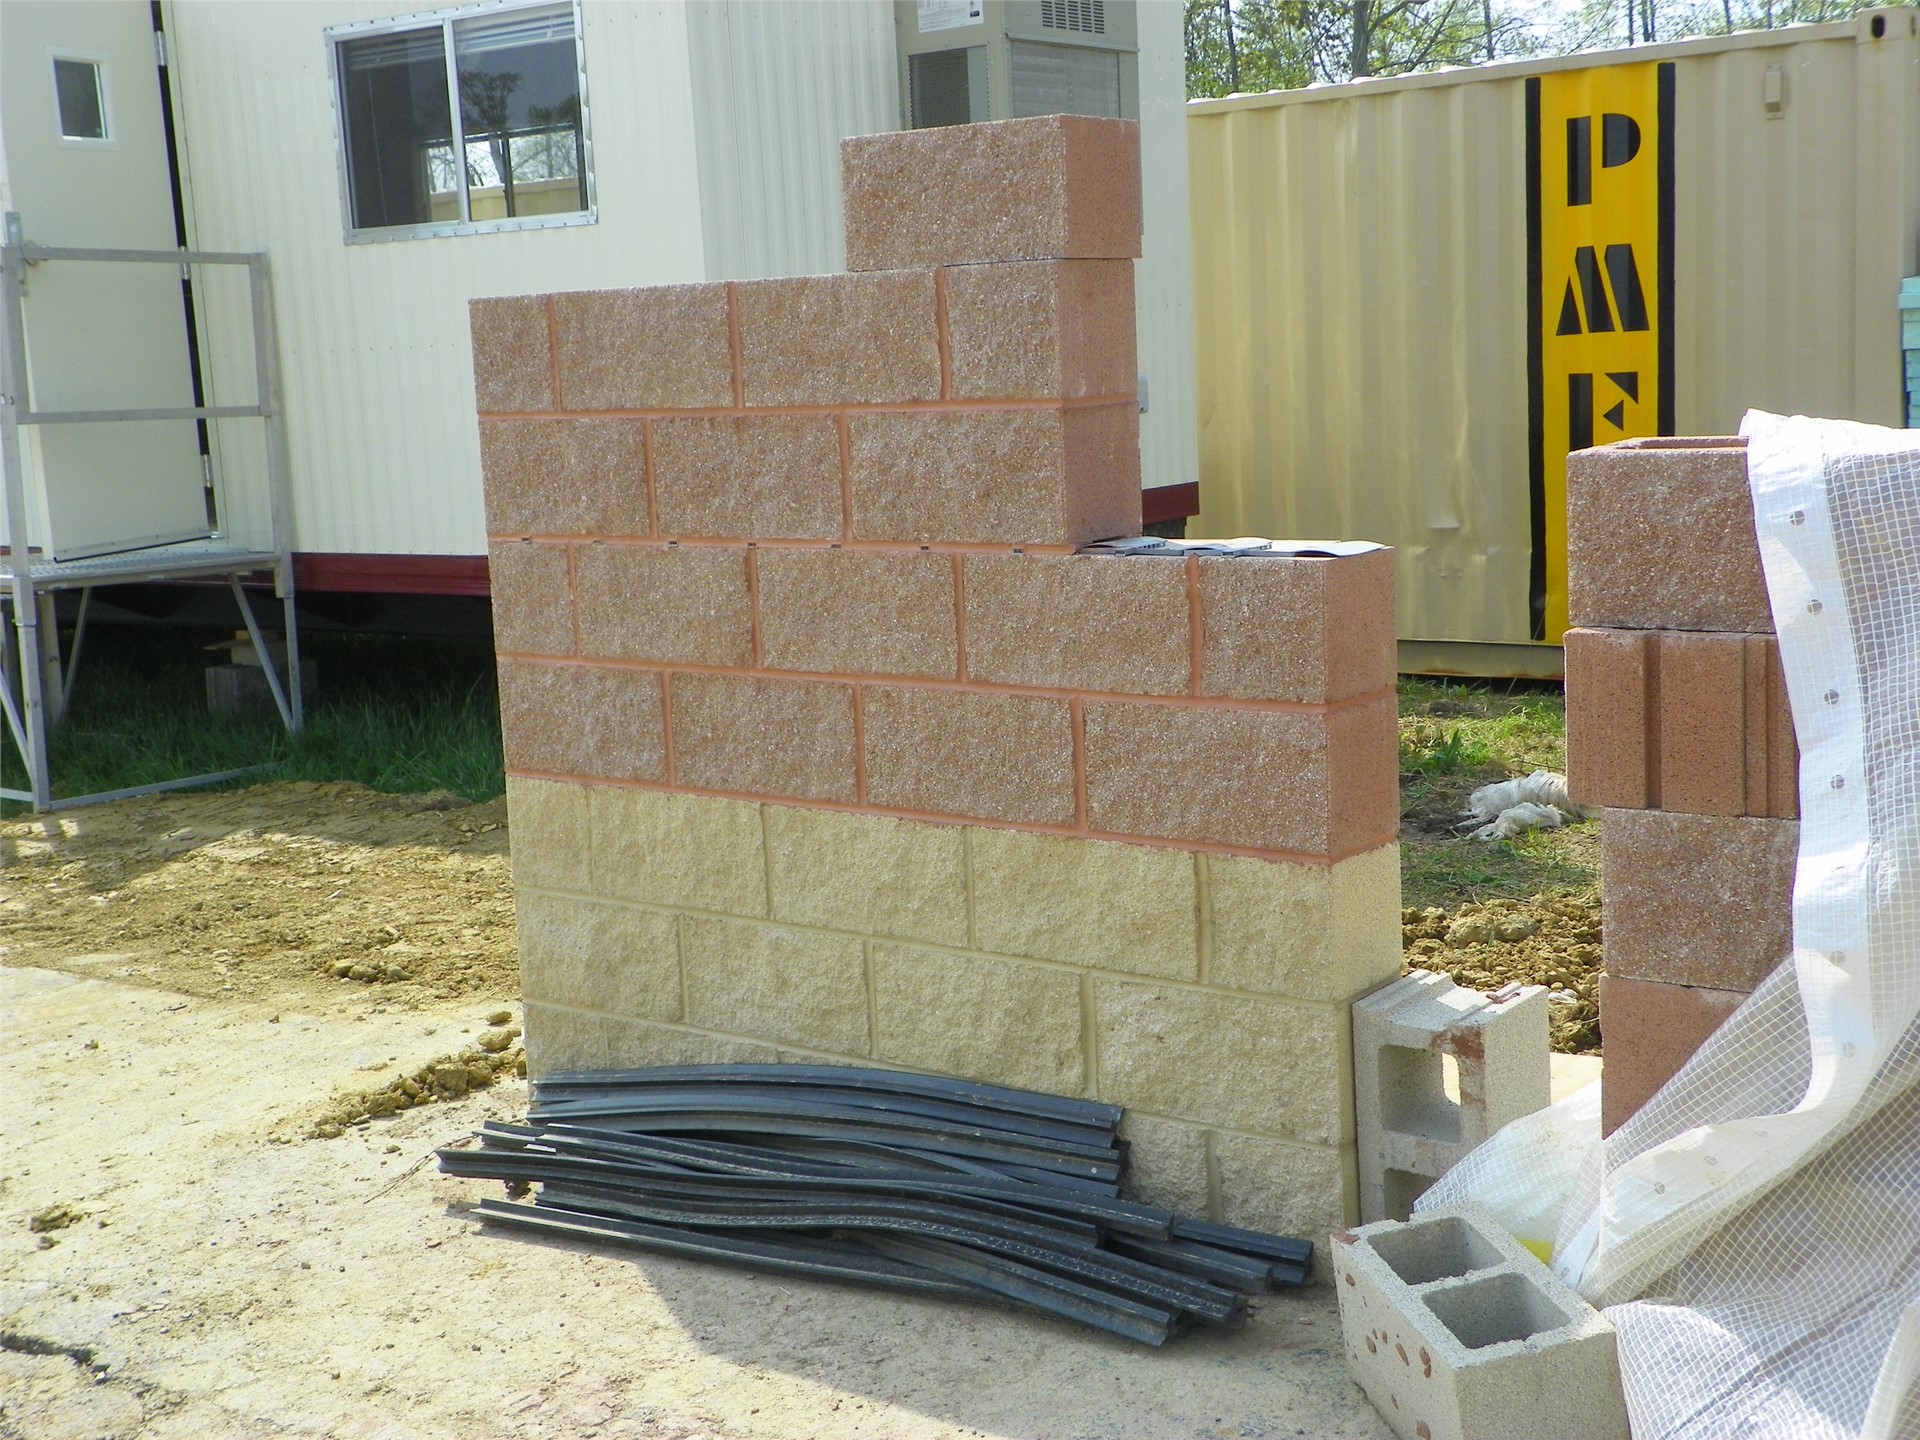 Sample brick wall that will be used for concession/locker room buildings